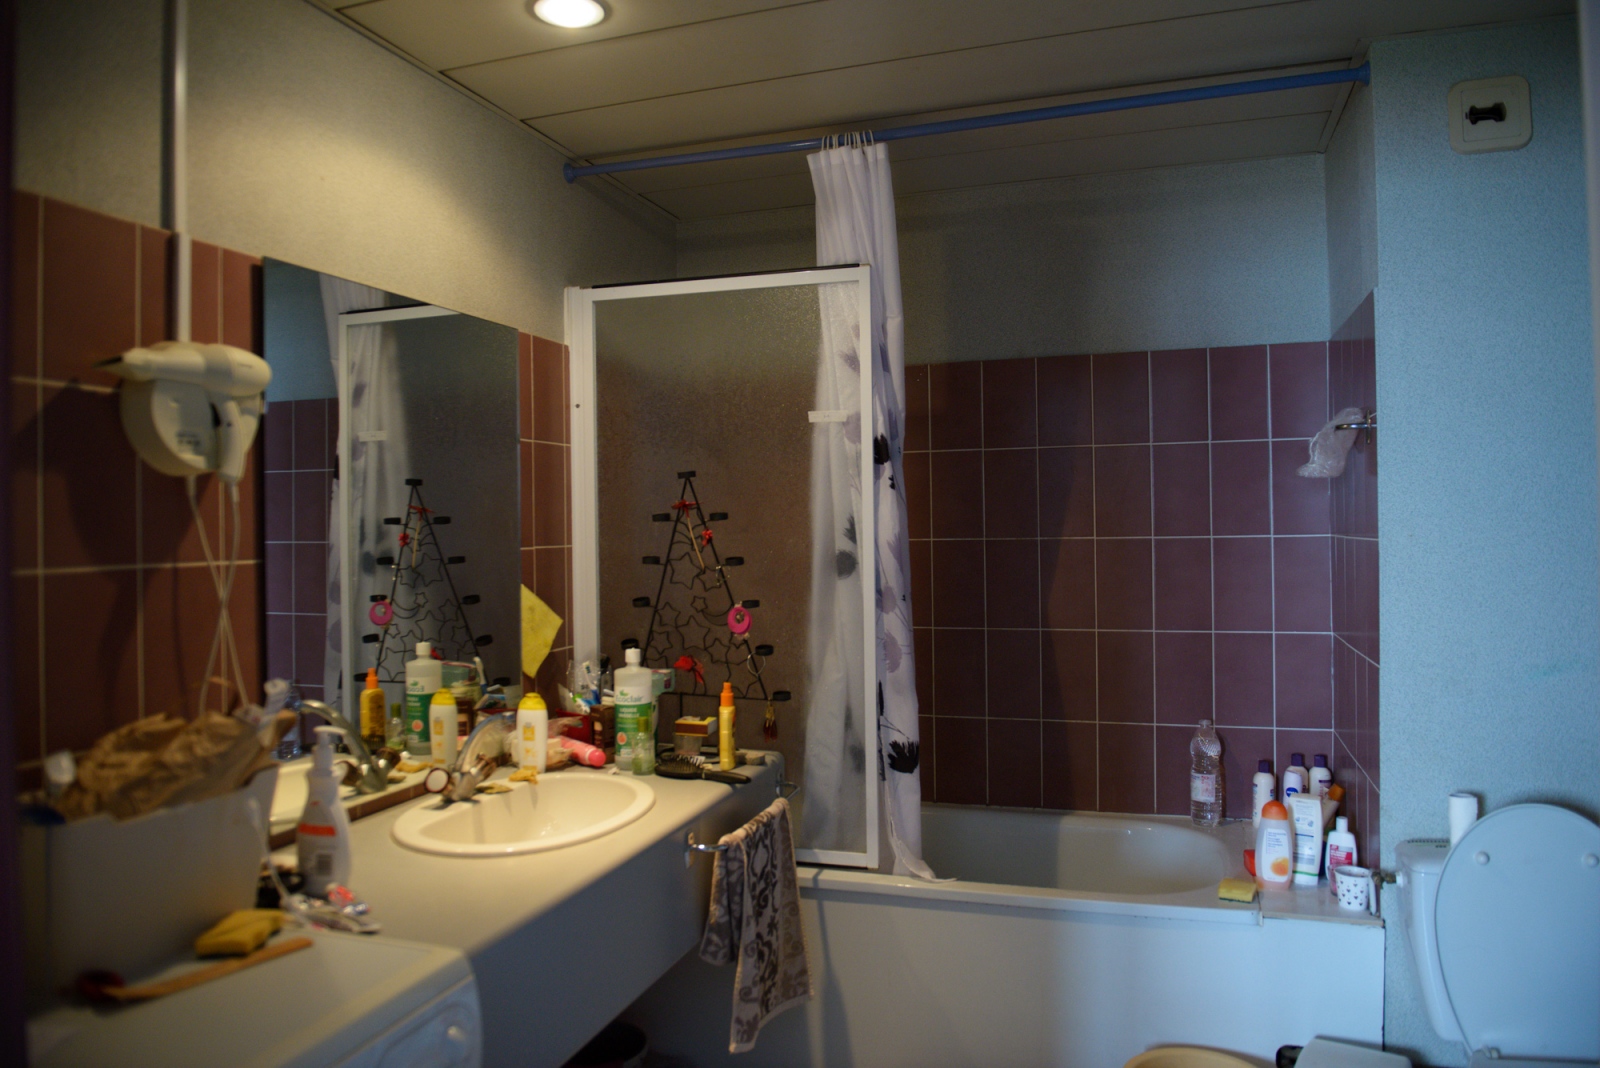 EN// The tenant of this bathroom moved to Calais to work with refugees. Her bathroom in her...